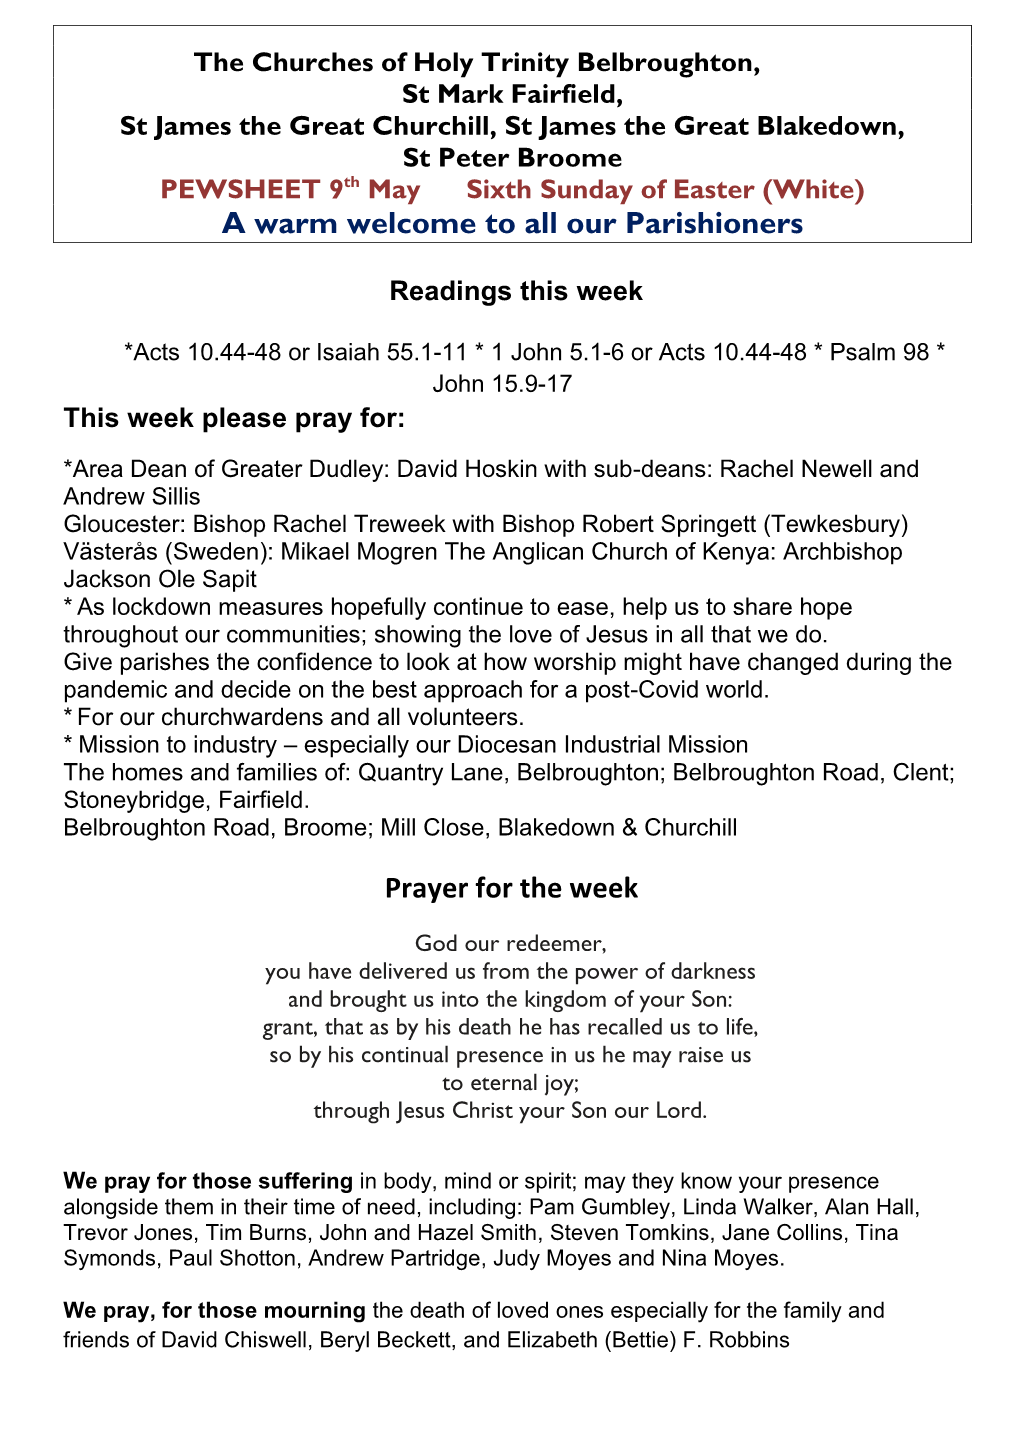 A Warm Welcome to All Our Parishioners Prayer for the Week